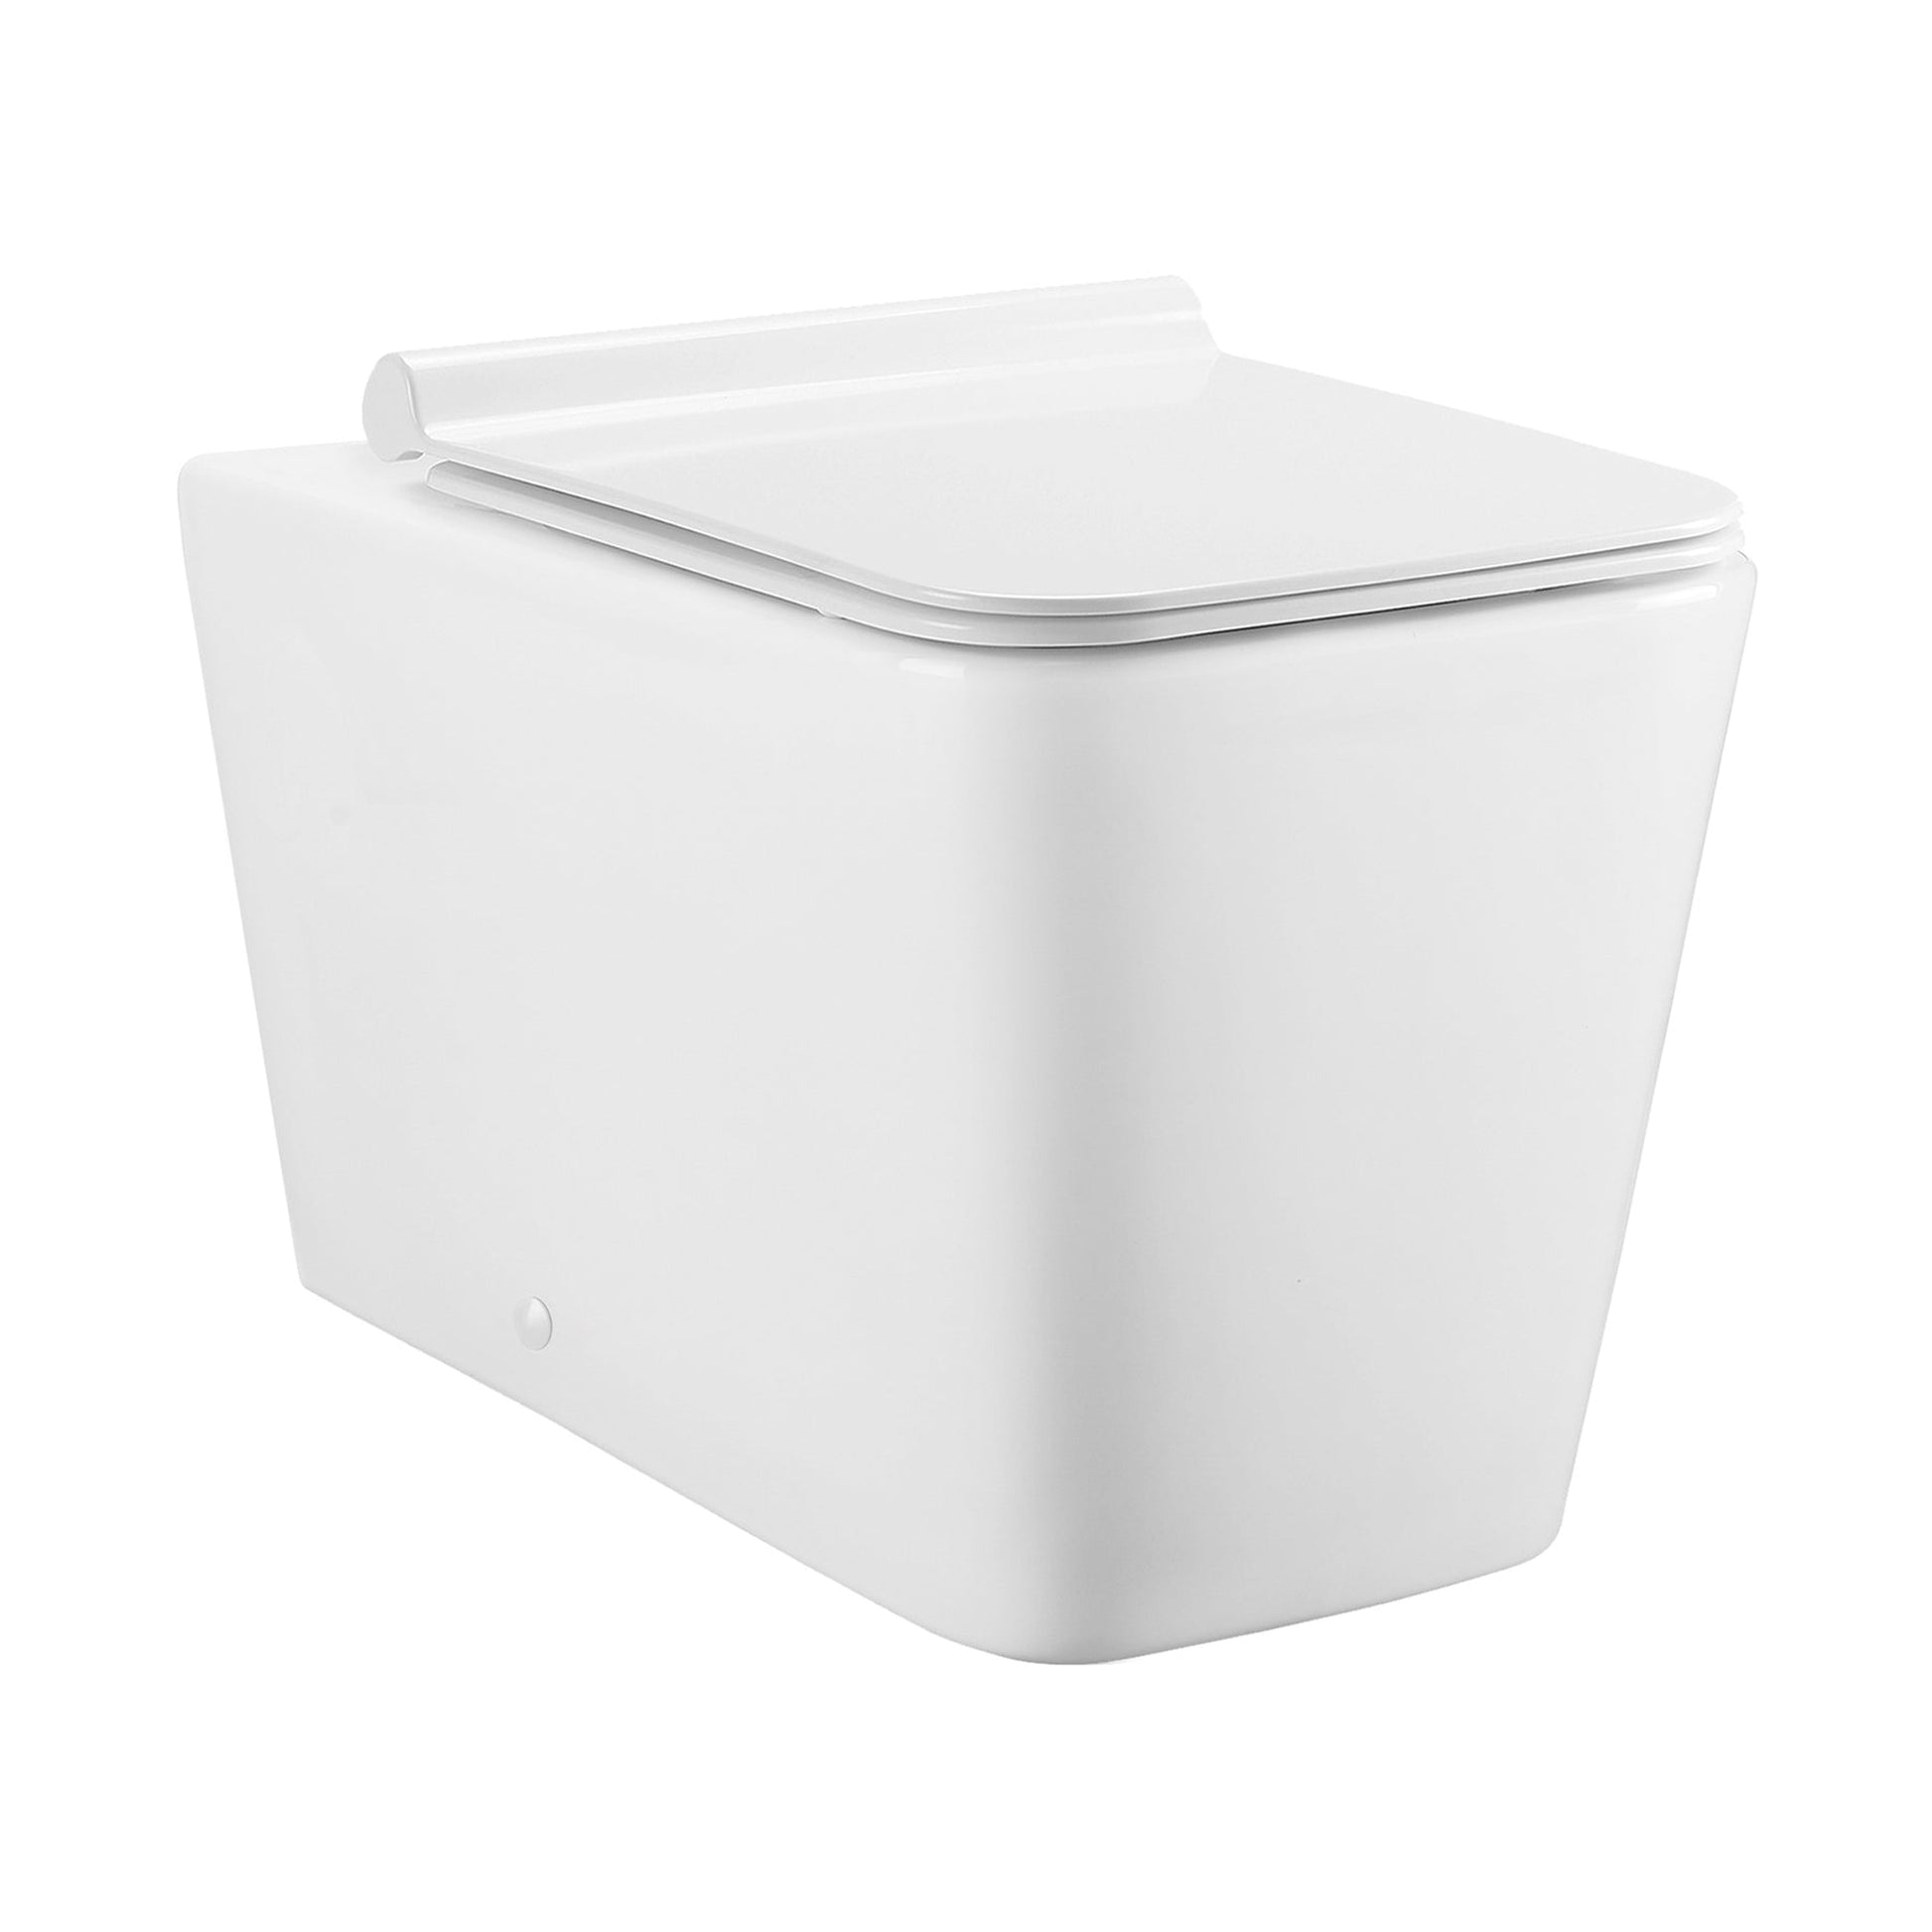 Swiss Madison Concorde 14" x 16" White Back-to-Wall Elongated Square Floor-Mounted Toilet Bowl